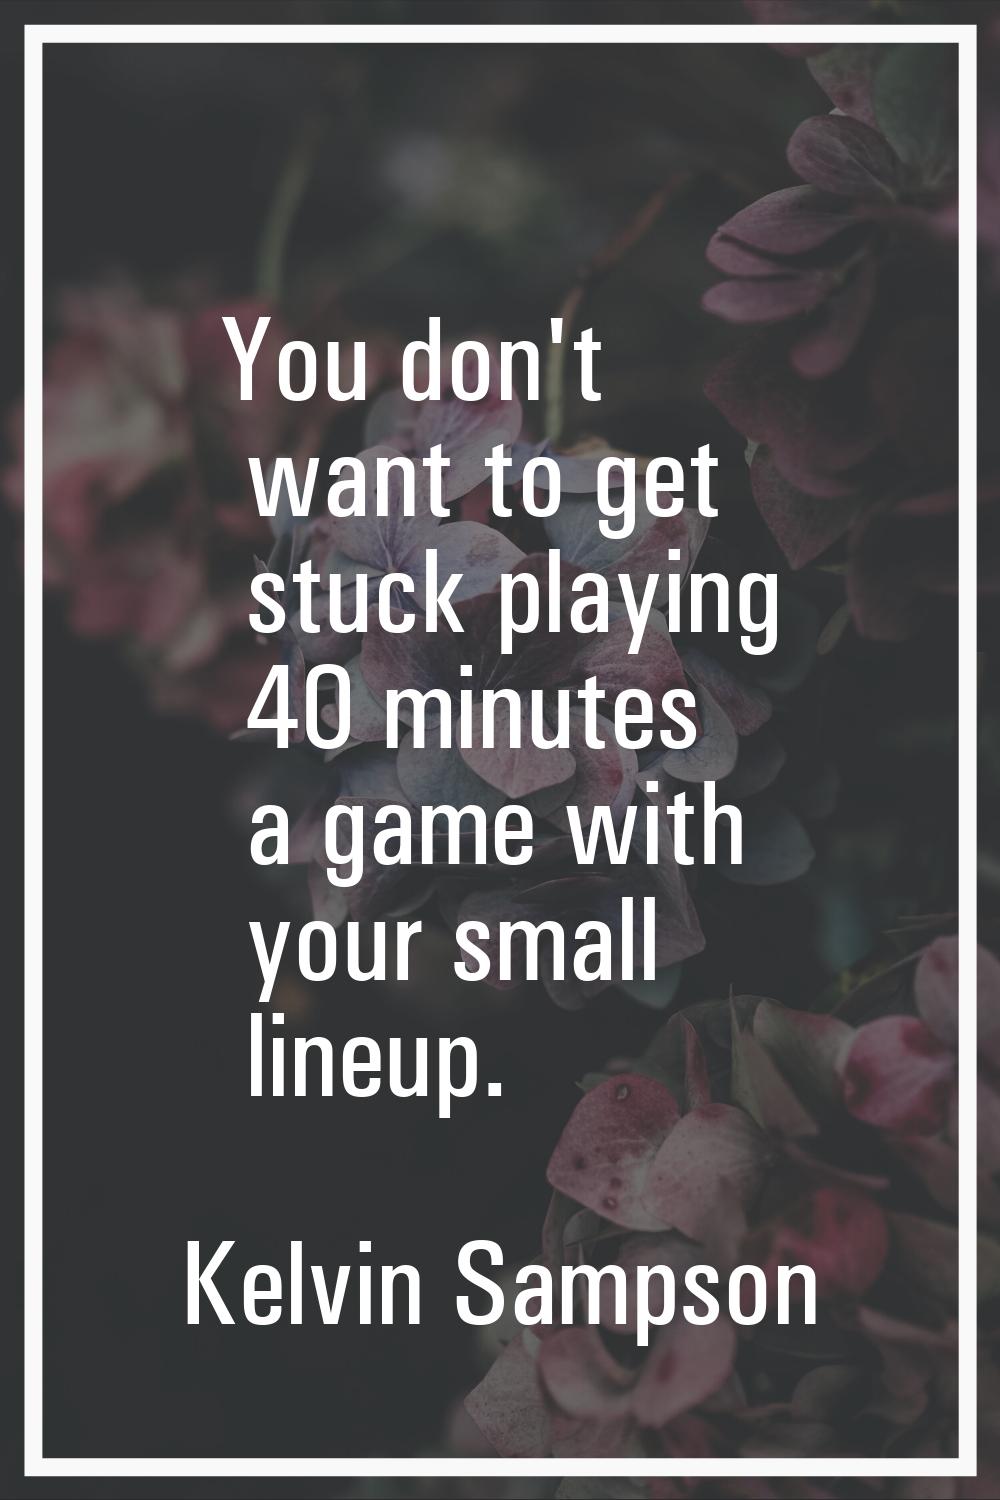 You don't want to get stuck playing 40 minutes a game with your small lineup.